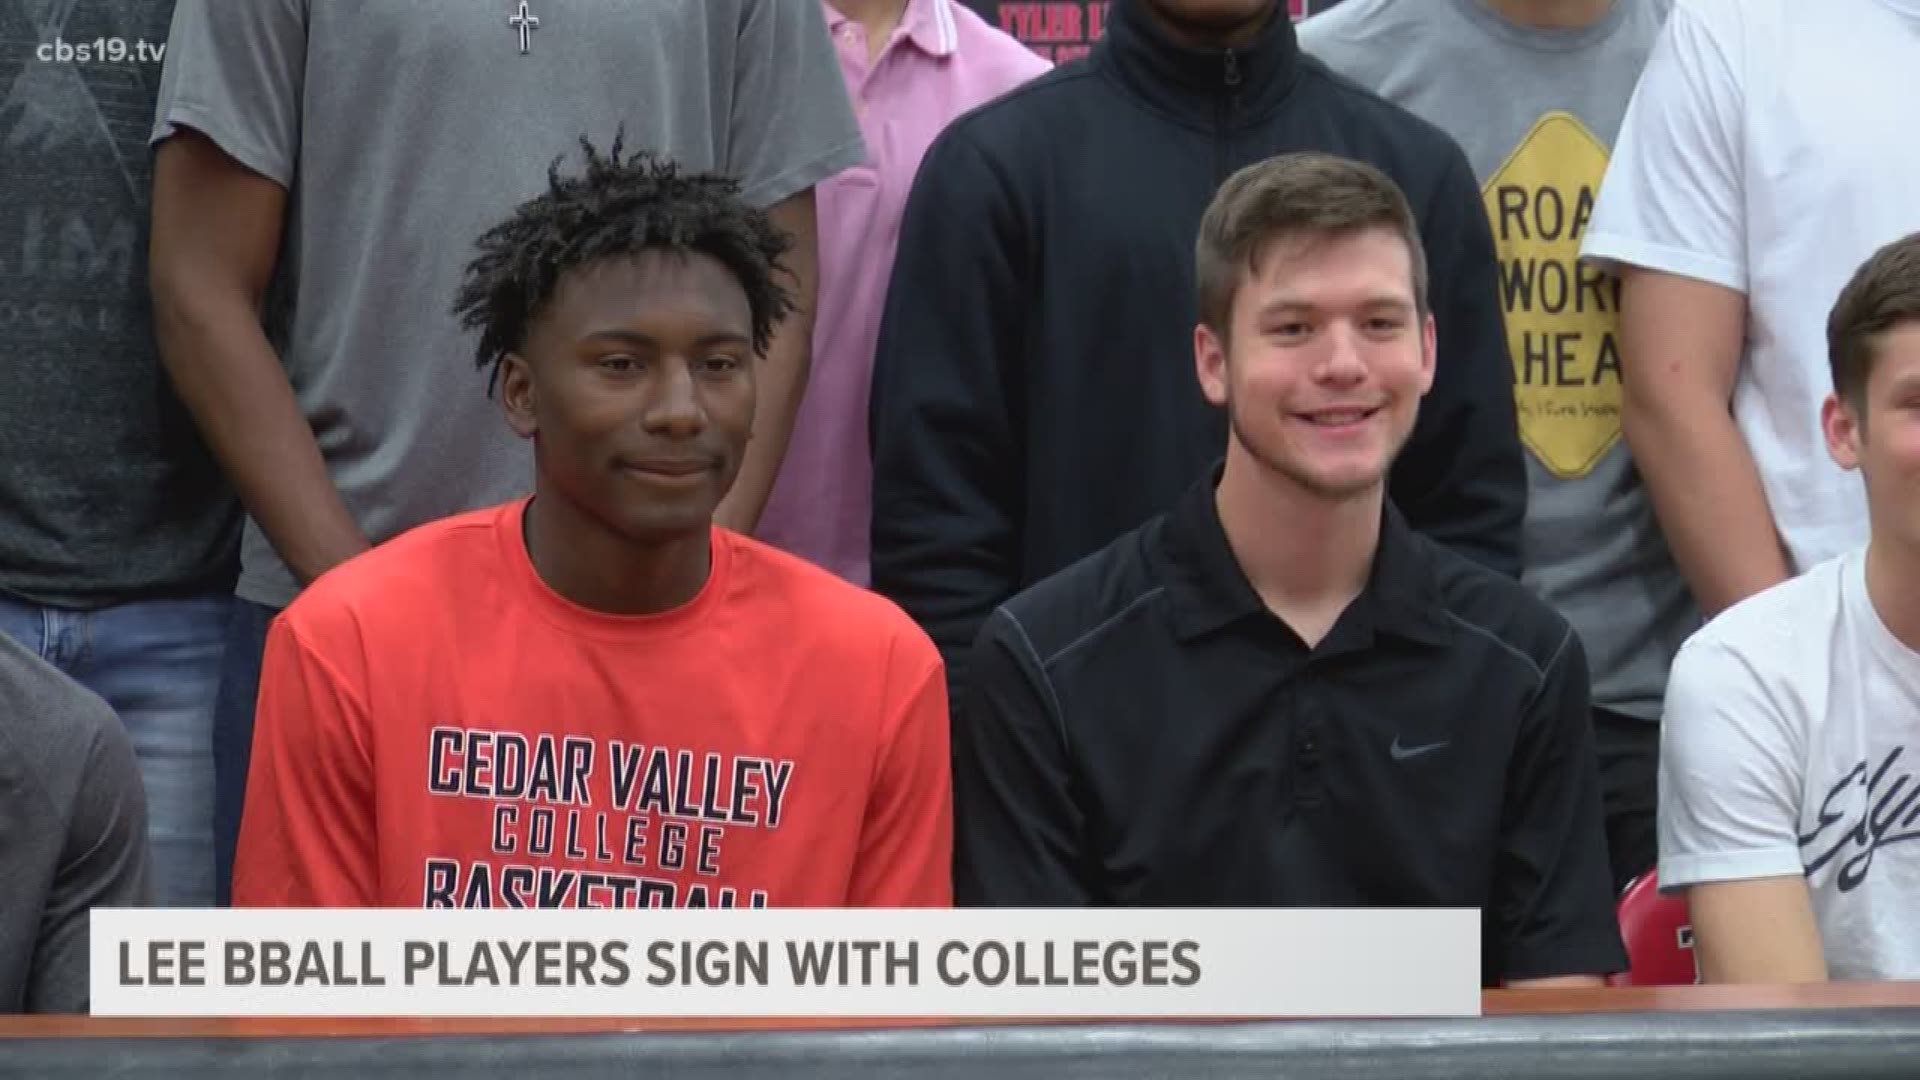 2 Lee basketball players sign with colleges